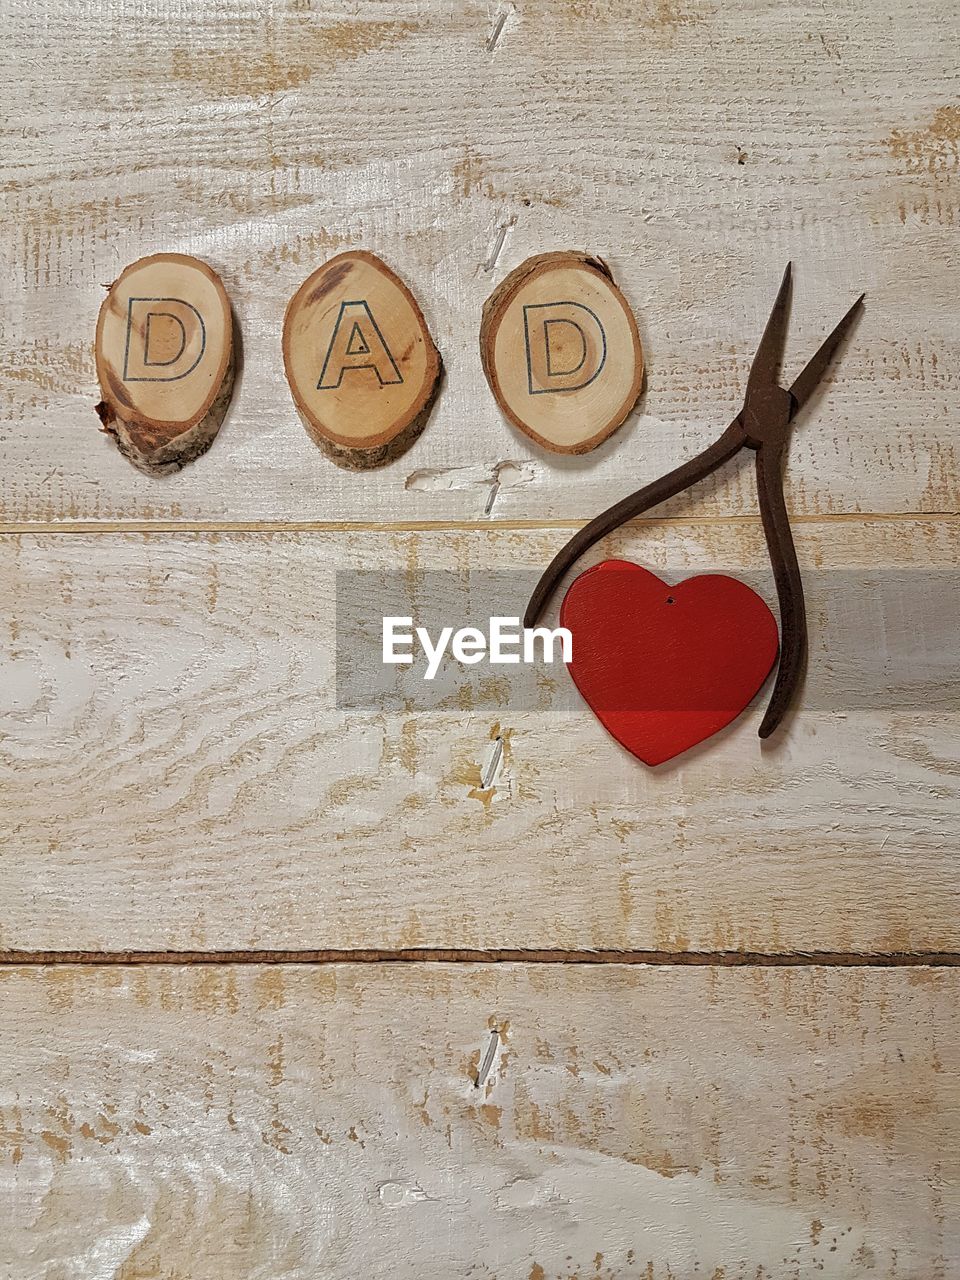 High angle view of dad alphabets by pliers and heart shape decoration on table